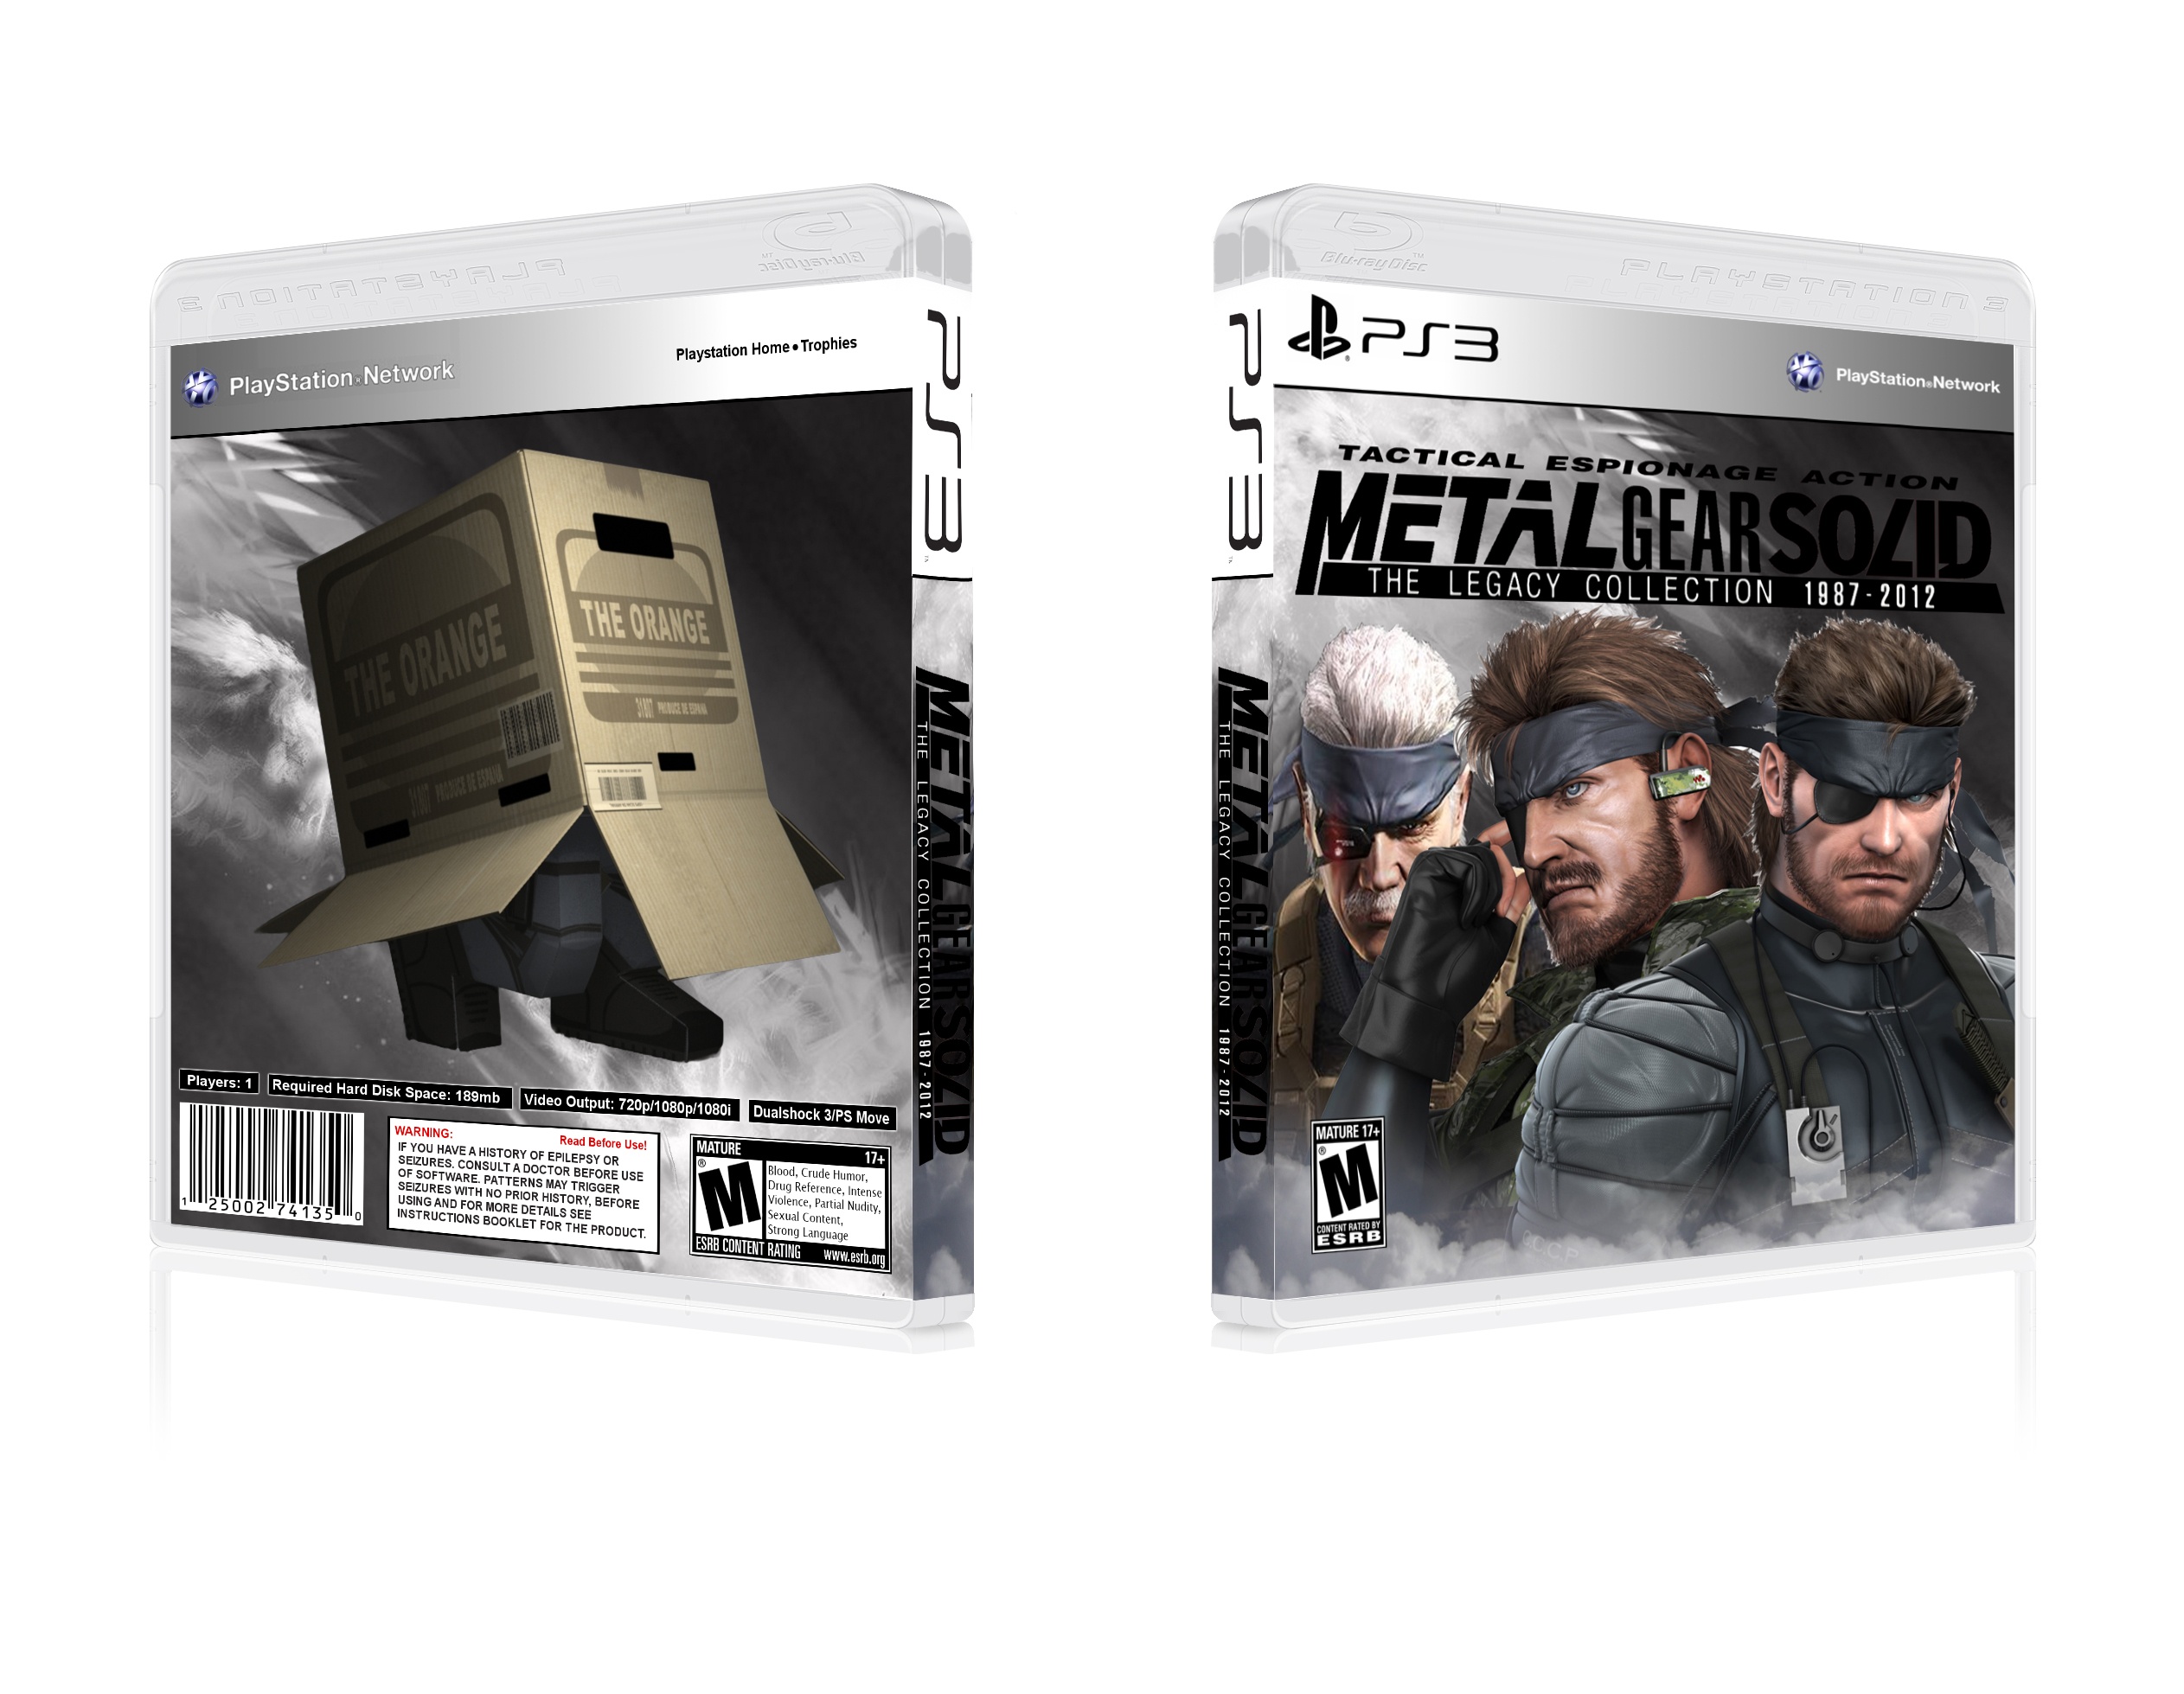 Metal Gear Solid: Legacy Collection PlayStation 3 Box Art Cover by